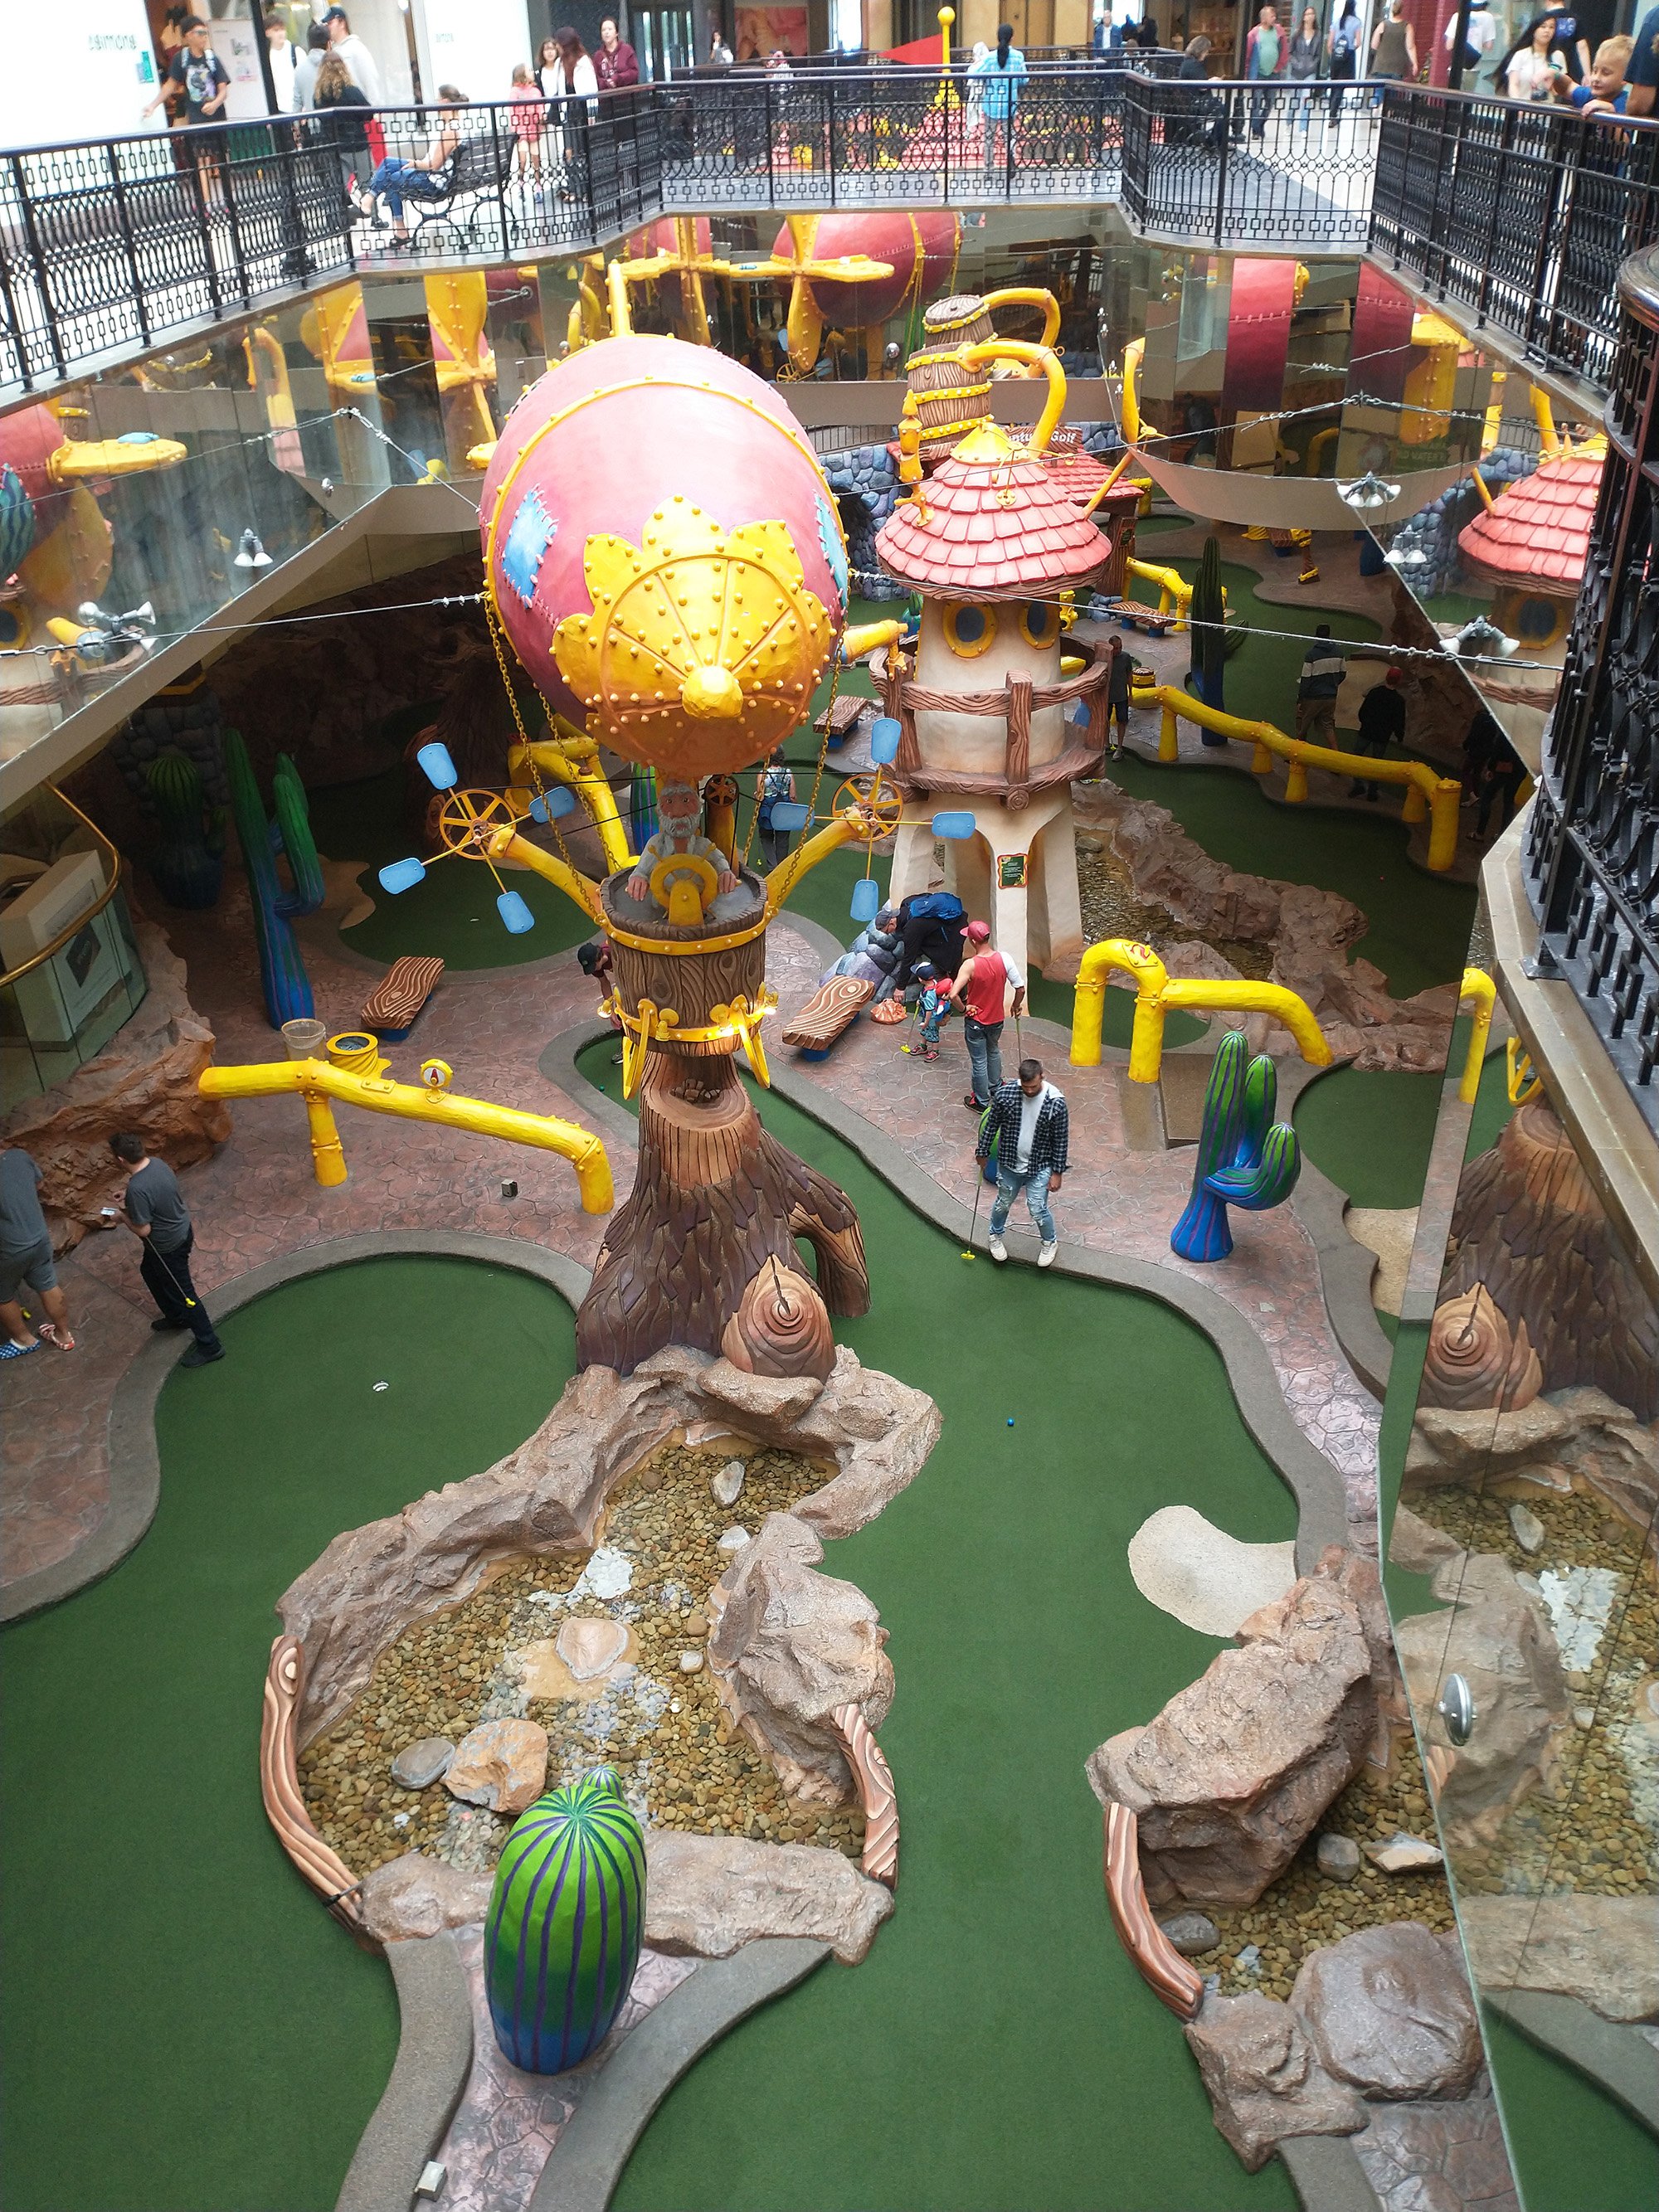 Another minigolf course, this one of the "Big Goofy Sculptures" variety.